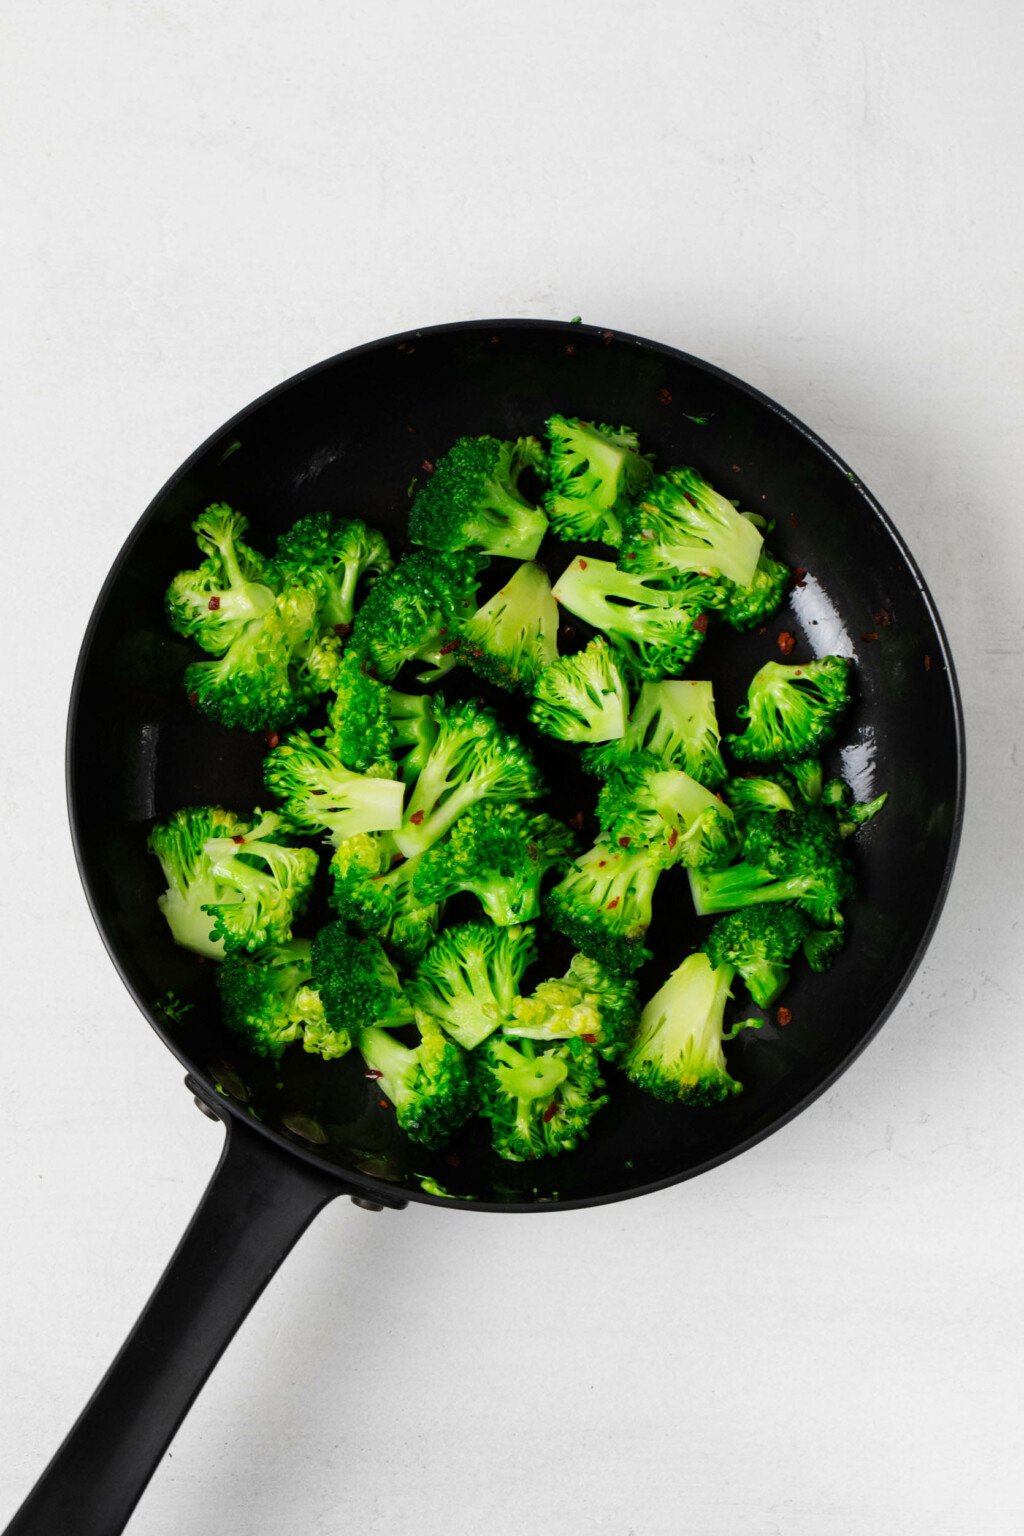 Cooking broccoli florets in a cast iron skillet.